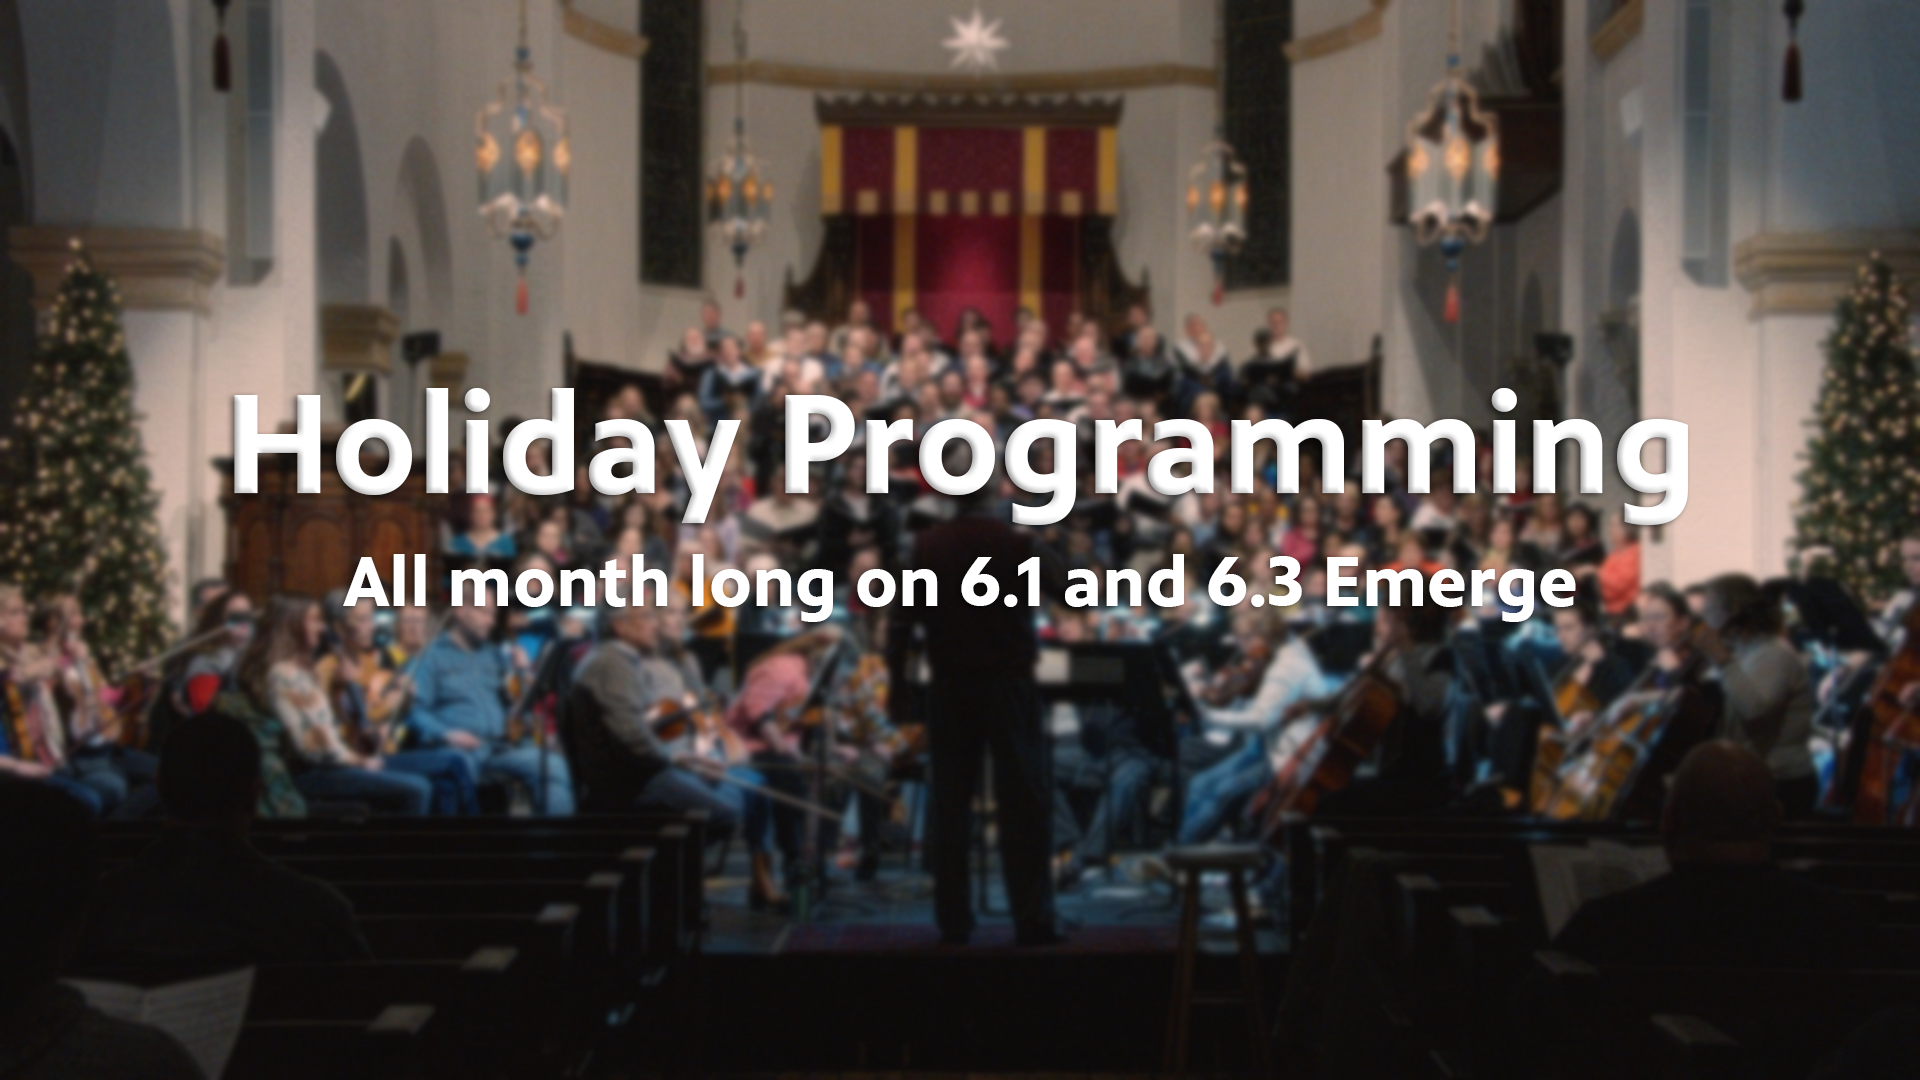 Holiday Programming All month long on 6.1 and 6.3 Emerge